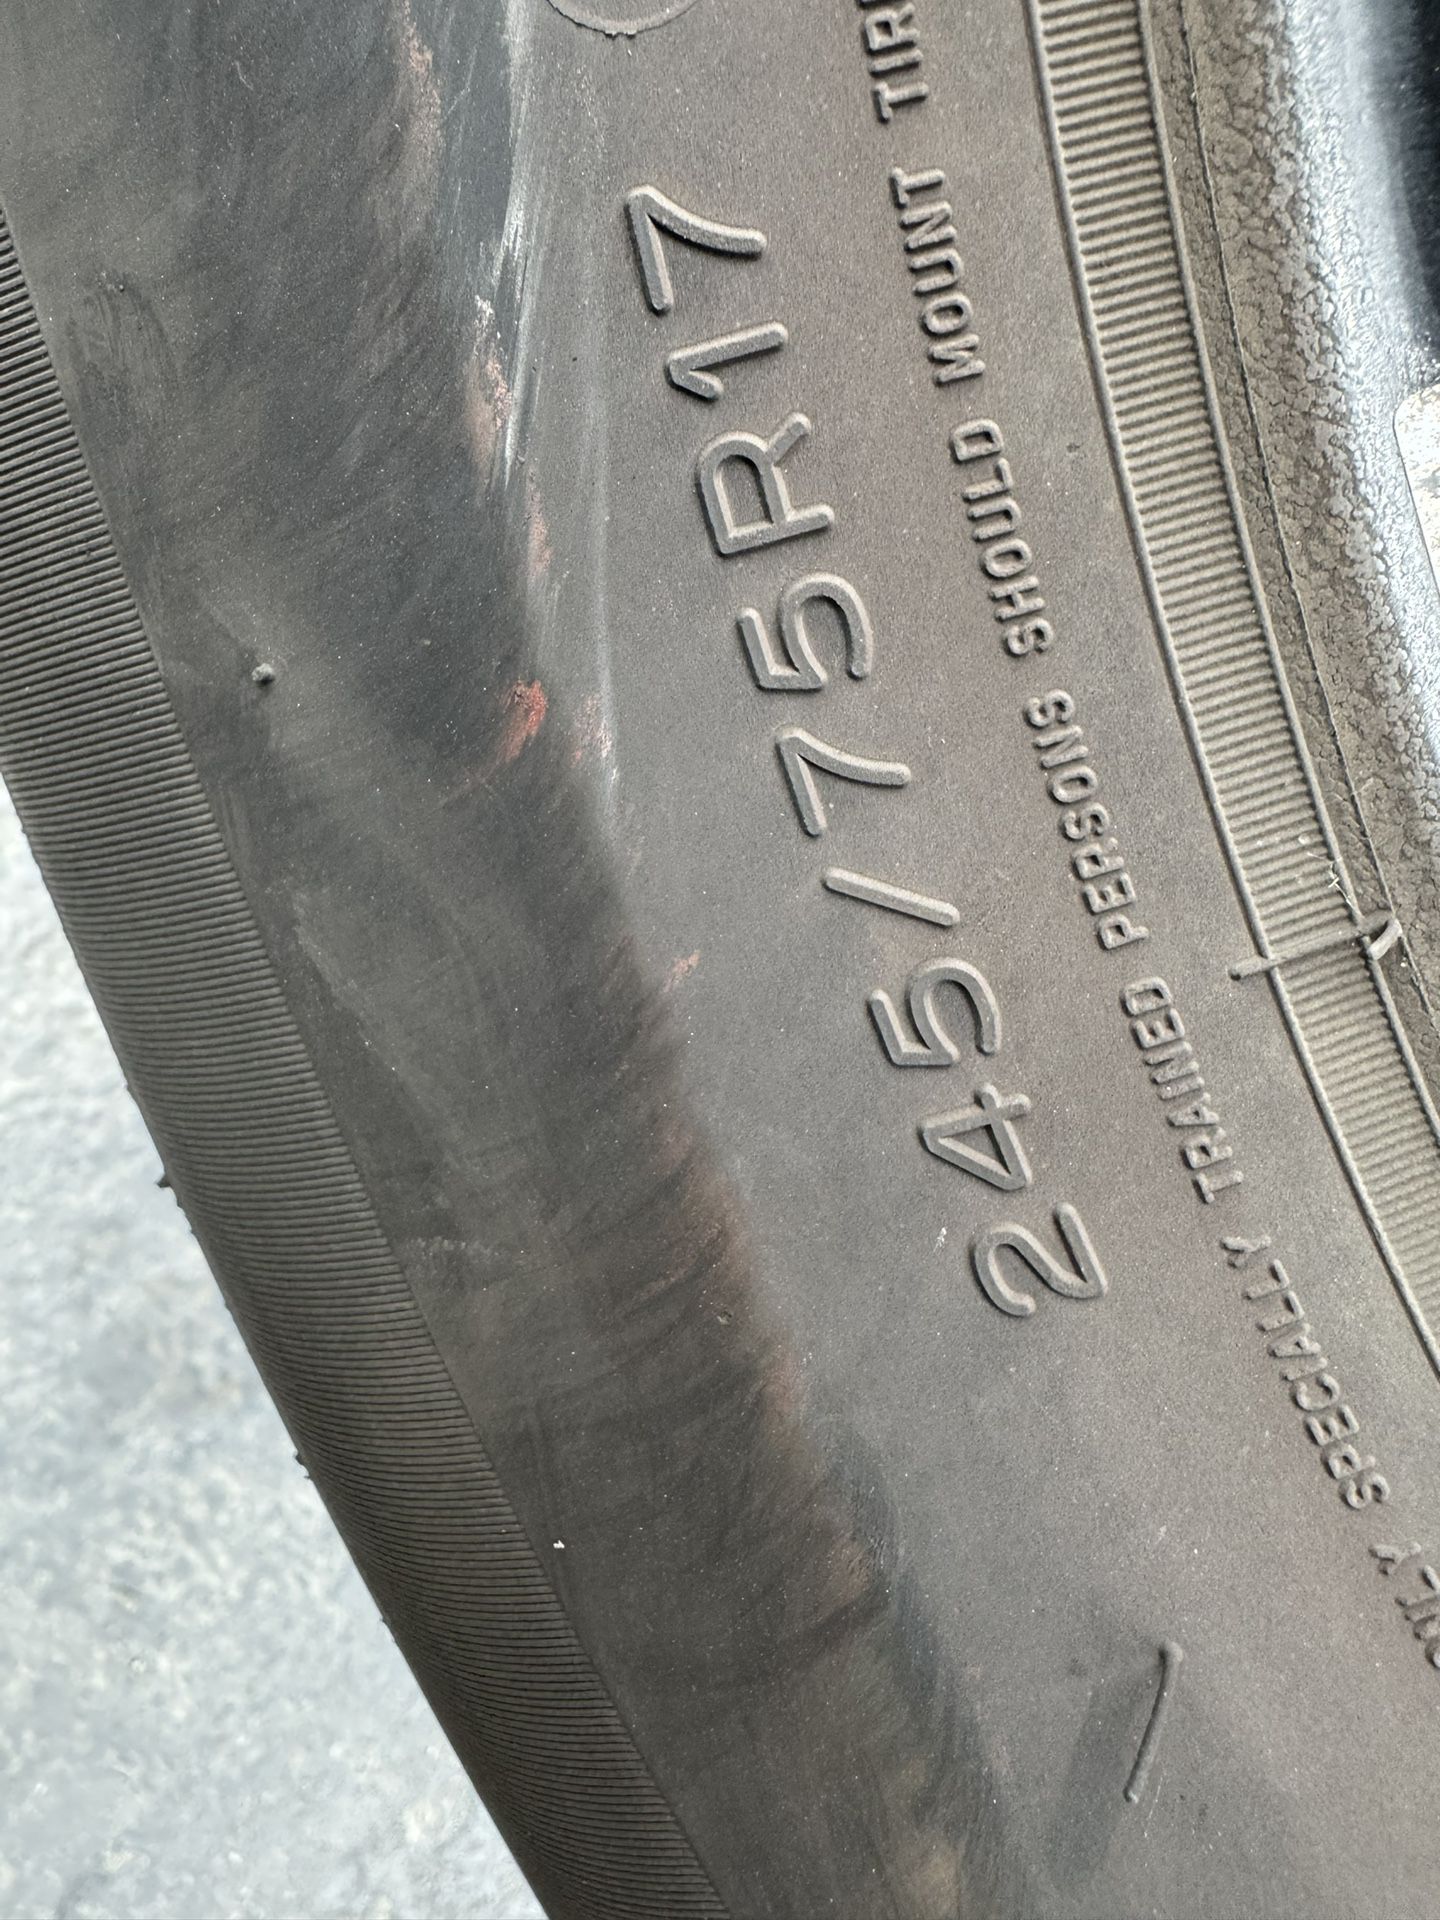 245/75/17 Michelin (2 Tires) $80.00/ Both 